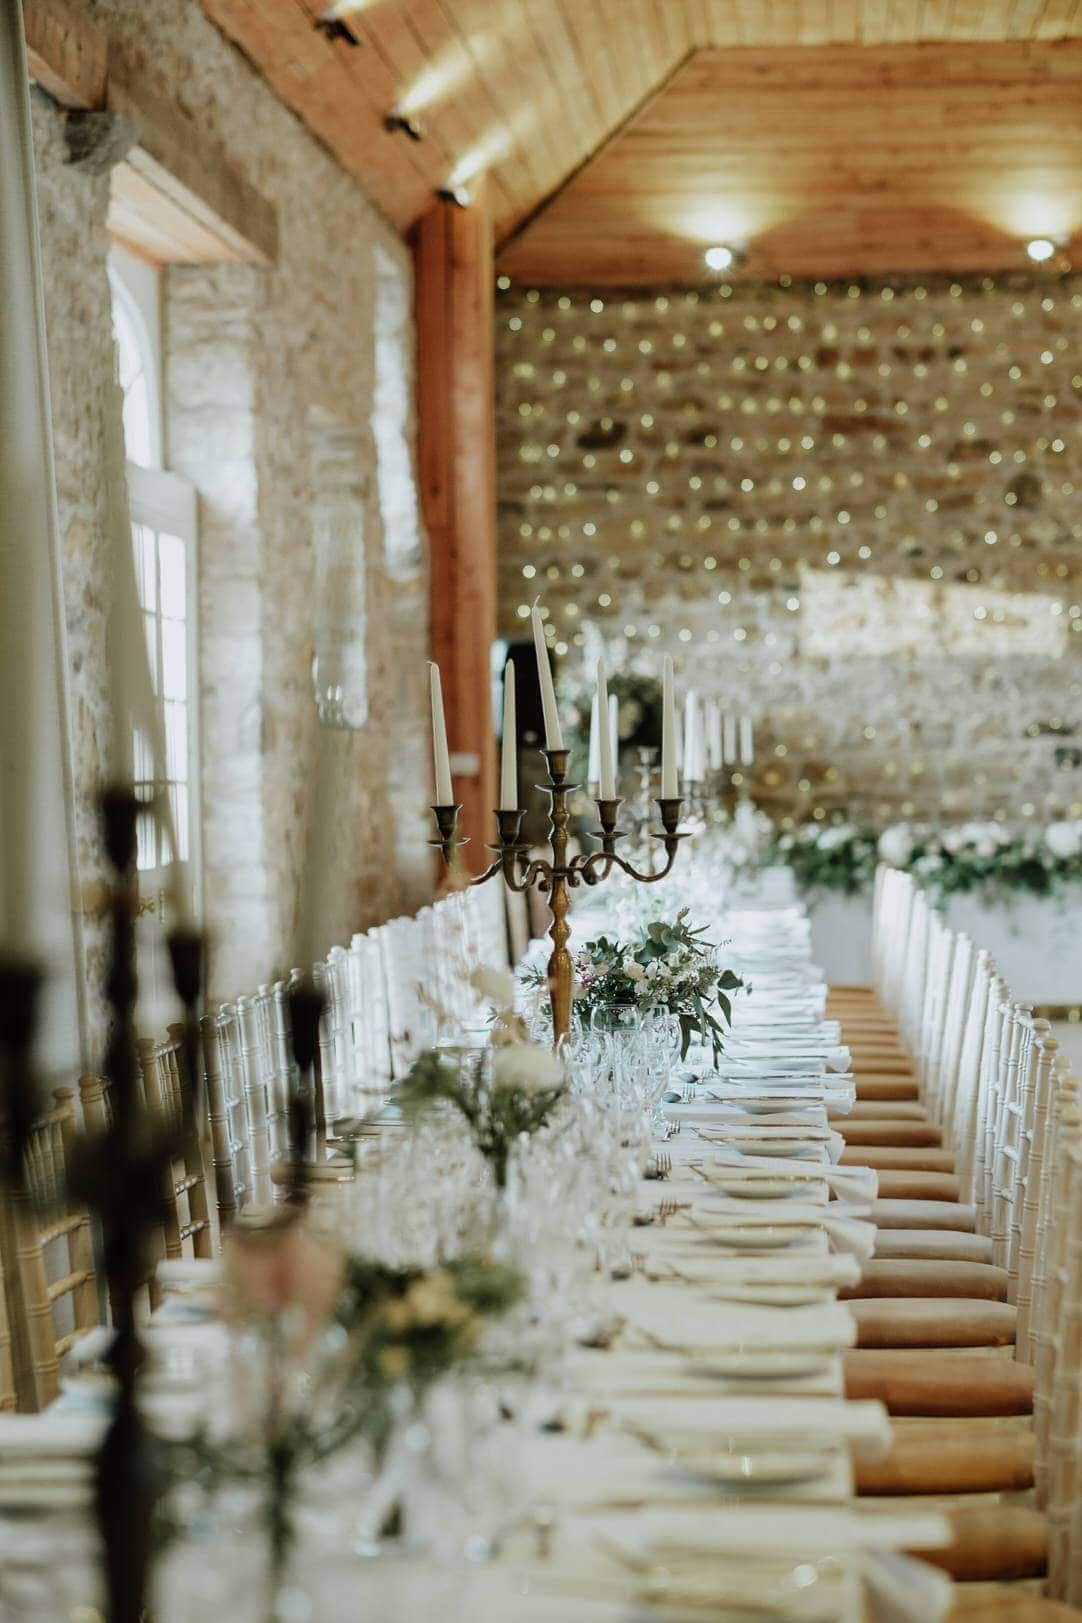 colstoun house wedding set up for a sinner reception indoors with long tables with candles on it against a stane brick wall